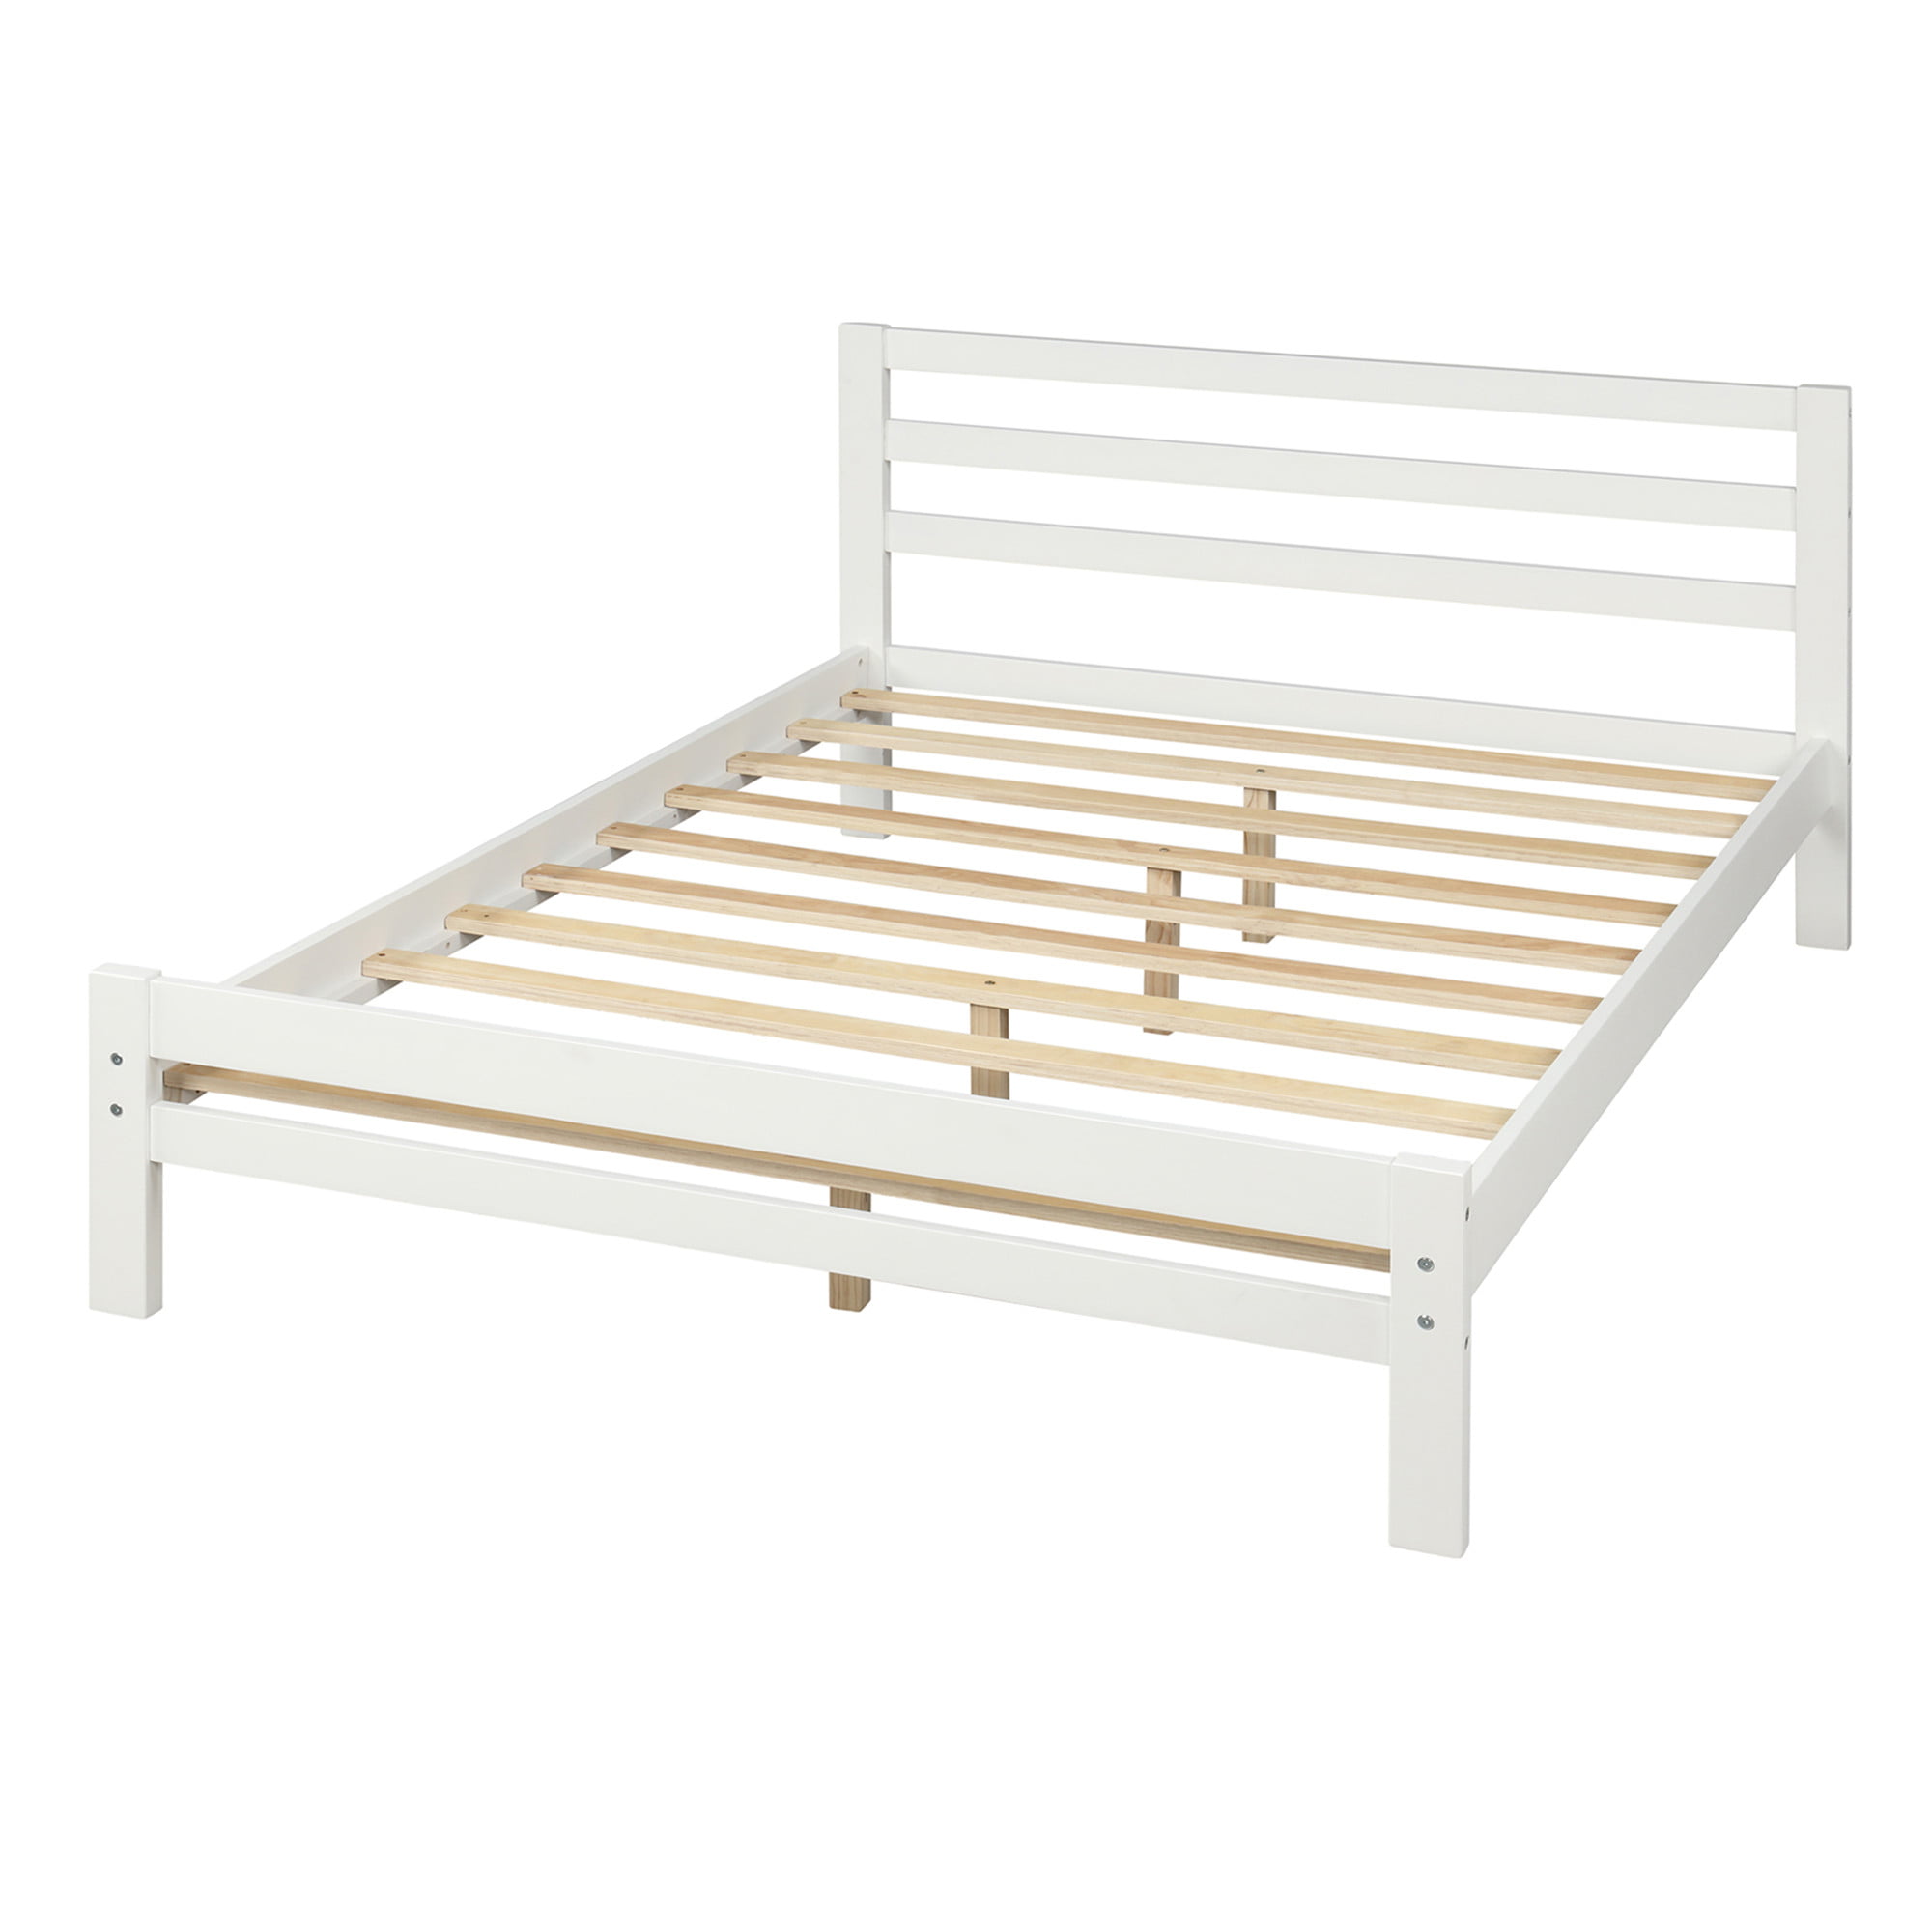 Sunisery Wood Platform Full Bed With, Bed Frame With Pull Out Drawers